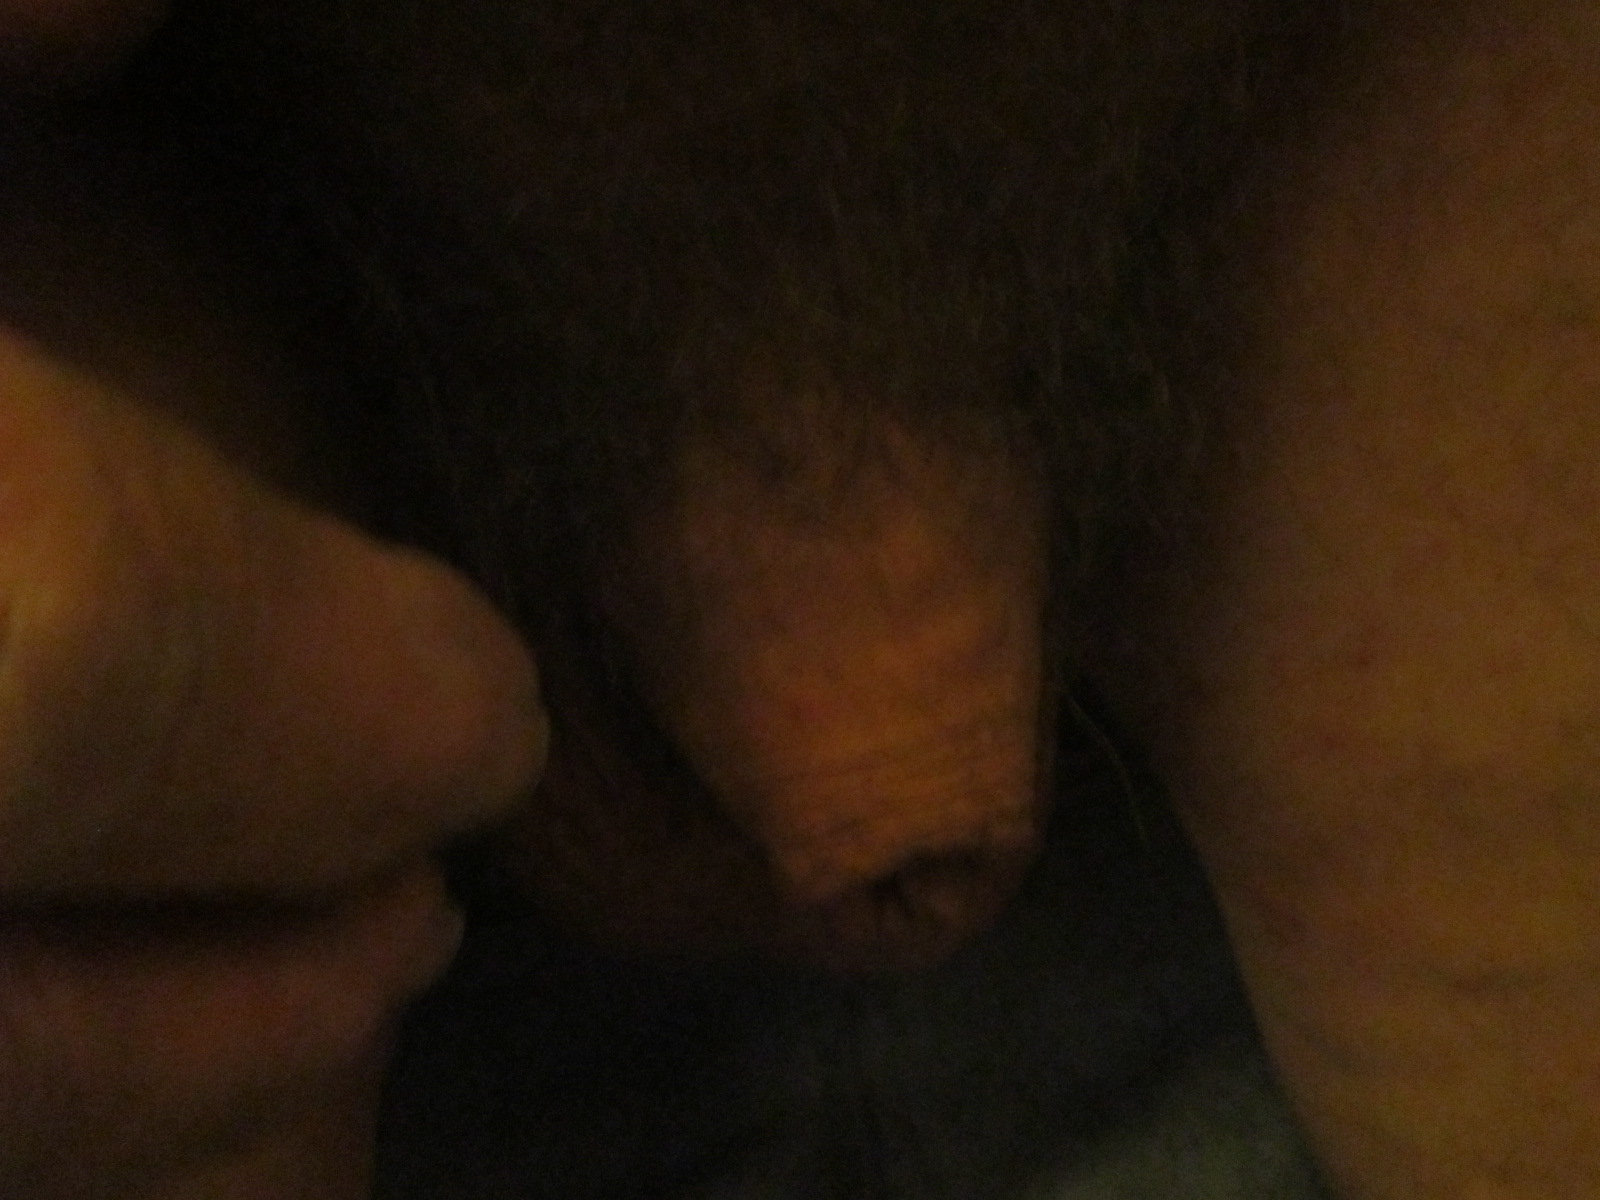 My Penis as it Looks Sheathed